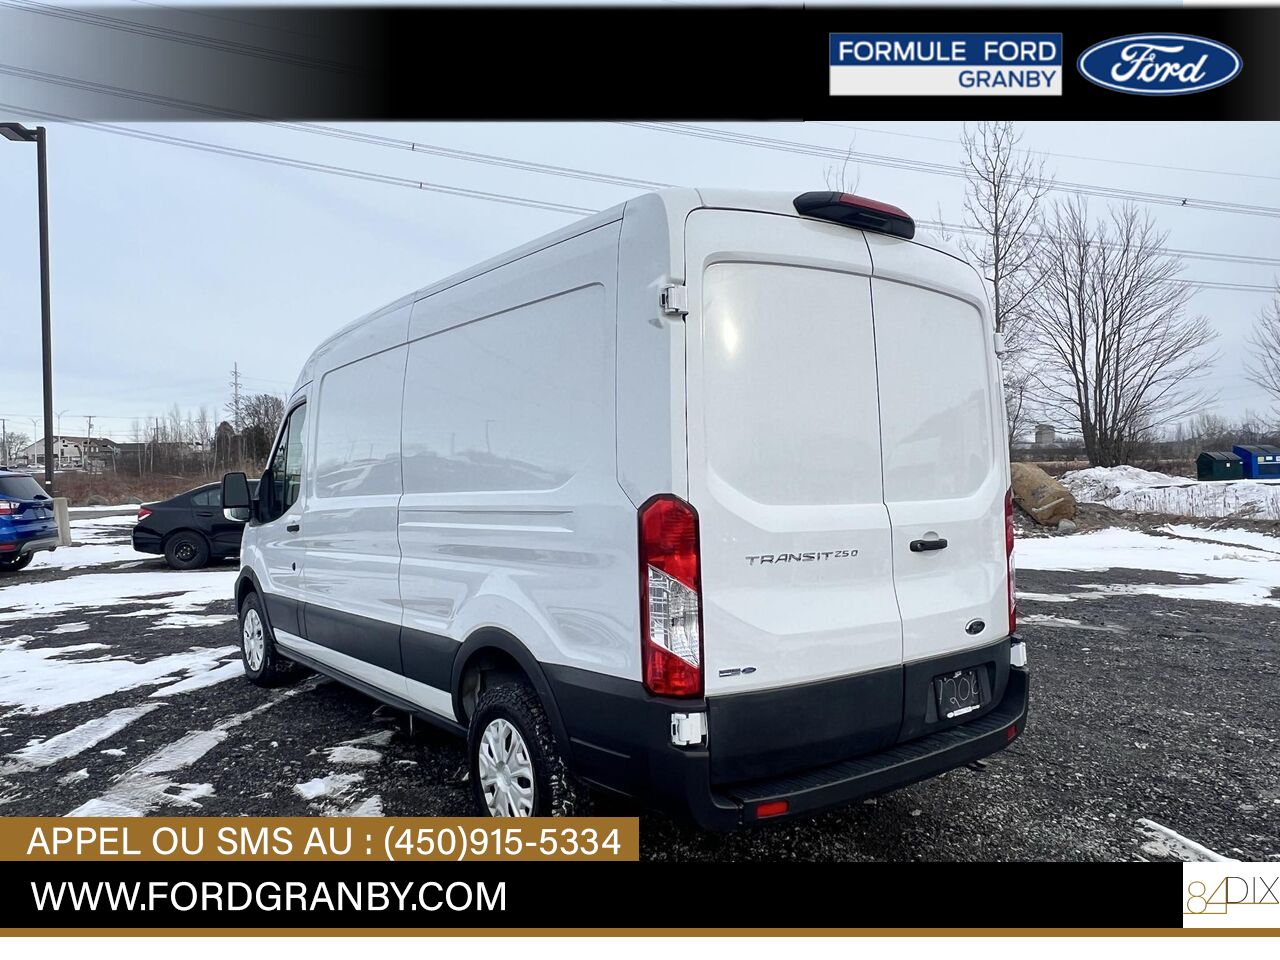 Ford Transit fourgon utilitaire 2021 Granby - photo #5